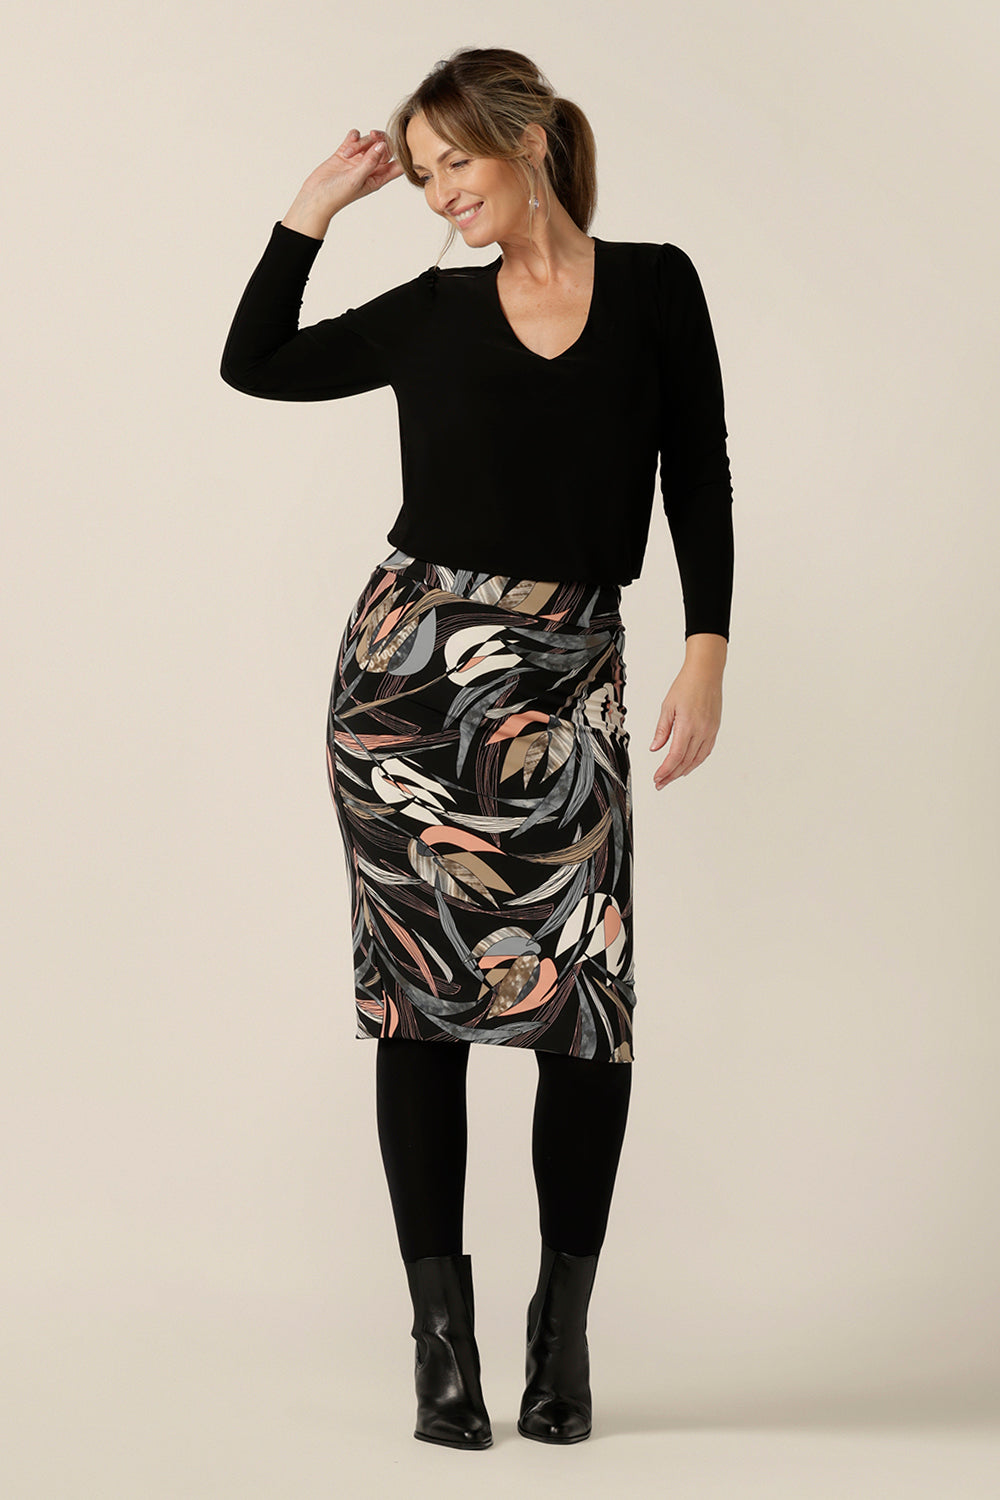 A woman wears a knee-length, tube skirt in floral print stretch jersey, size 10 with a long sleeve, black V-neck top. A great workwear skirt, this tube tube skirt is made in Australia by Australian and New Zealand women's clothing brand, L&F.